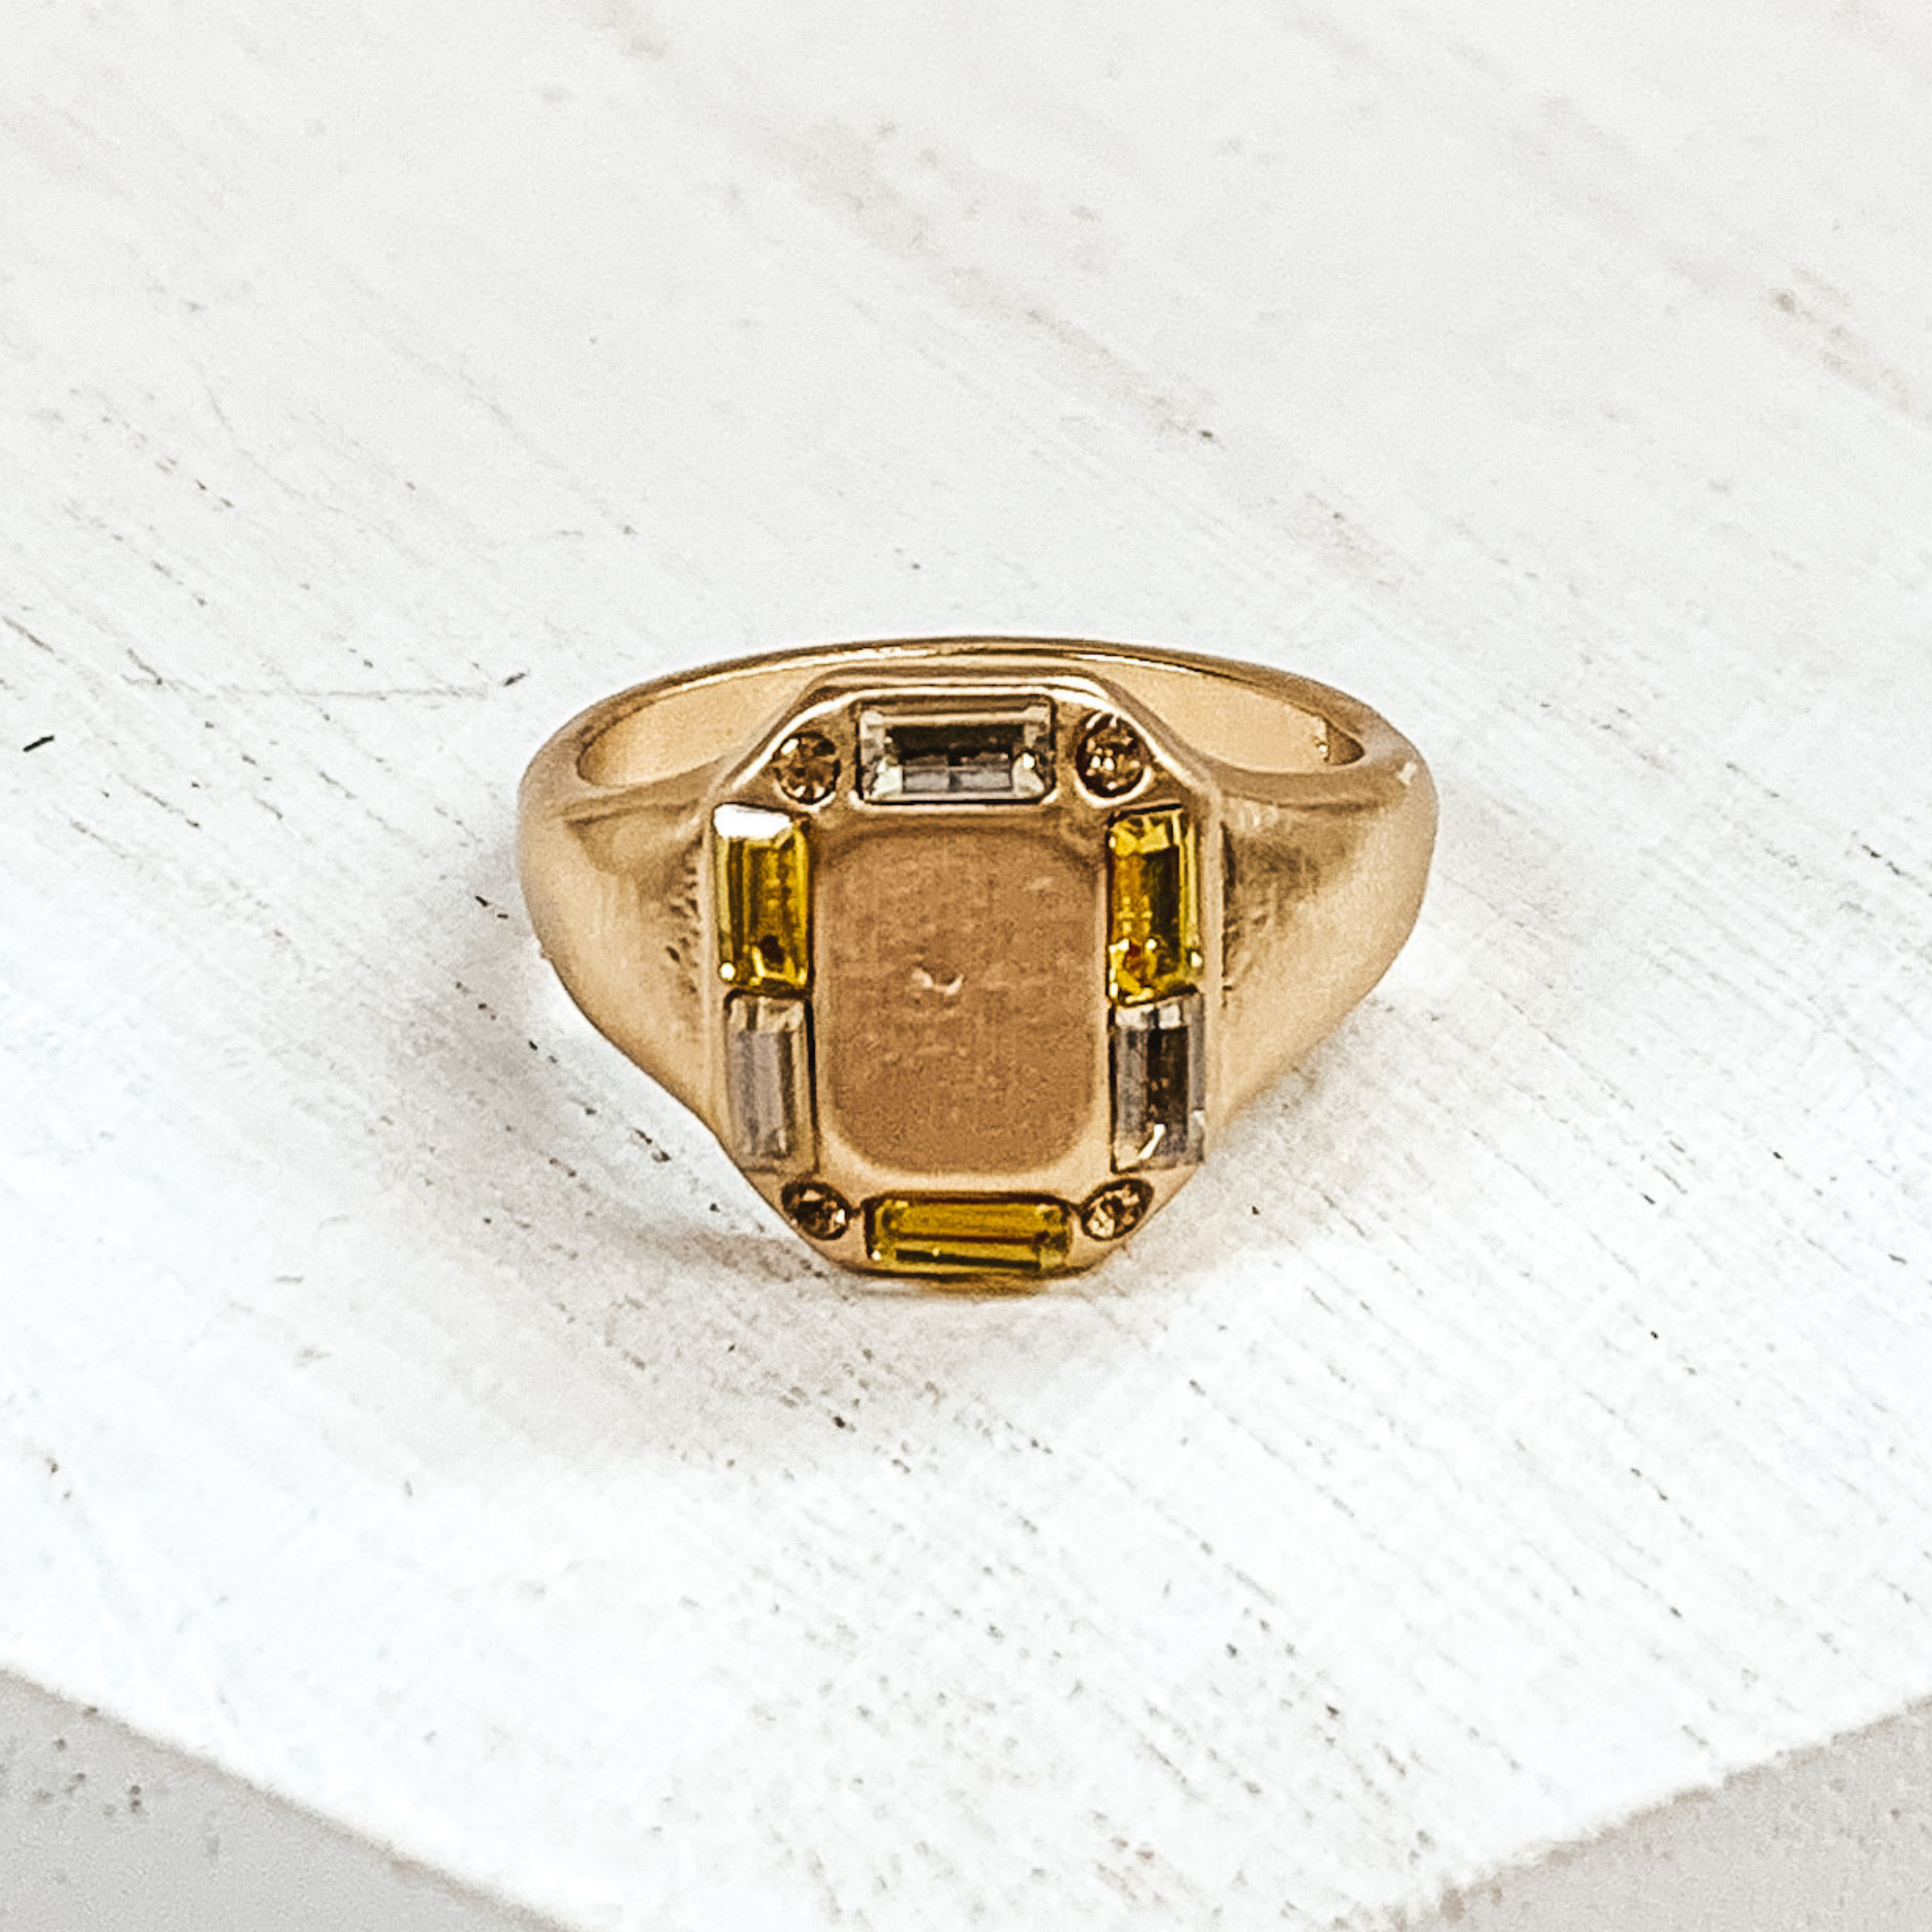 Thick gold band with a rectangle shaped front. The rectangle part includes small, mix of yellow crystals outlining it. This ring is pictured on a white background.